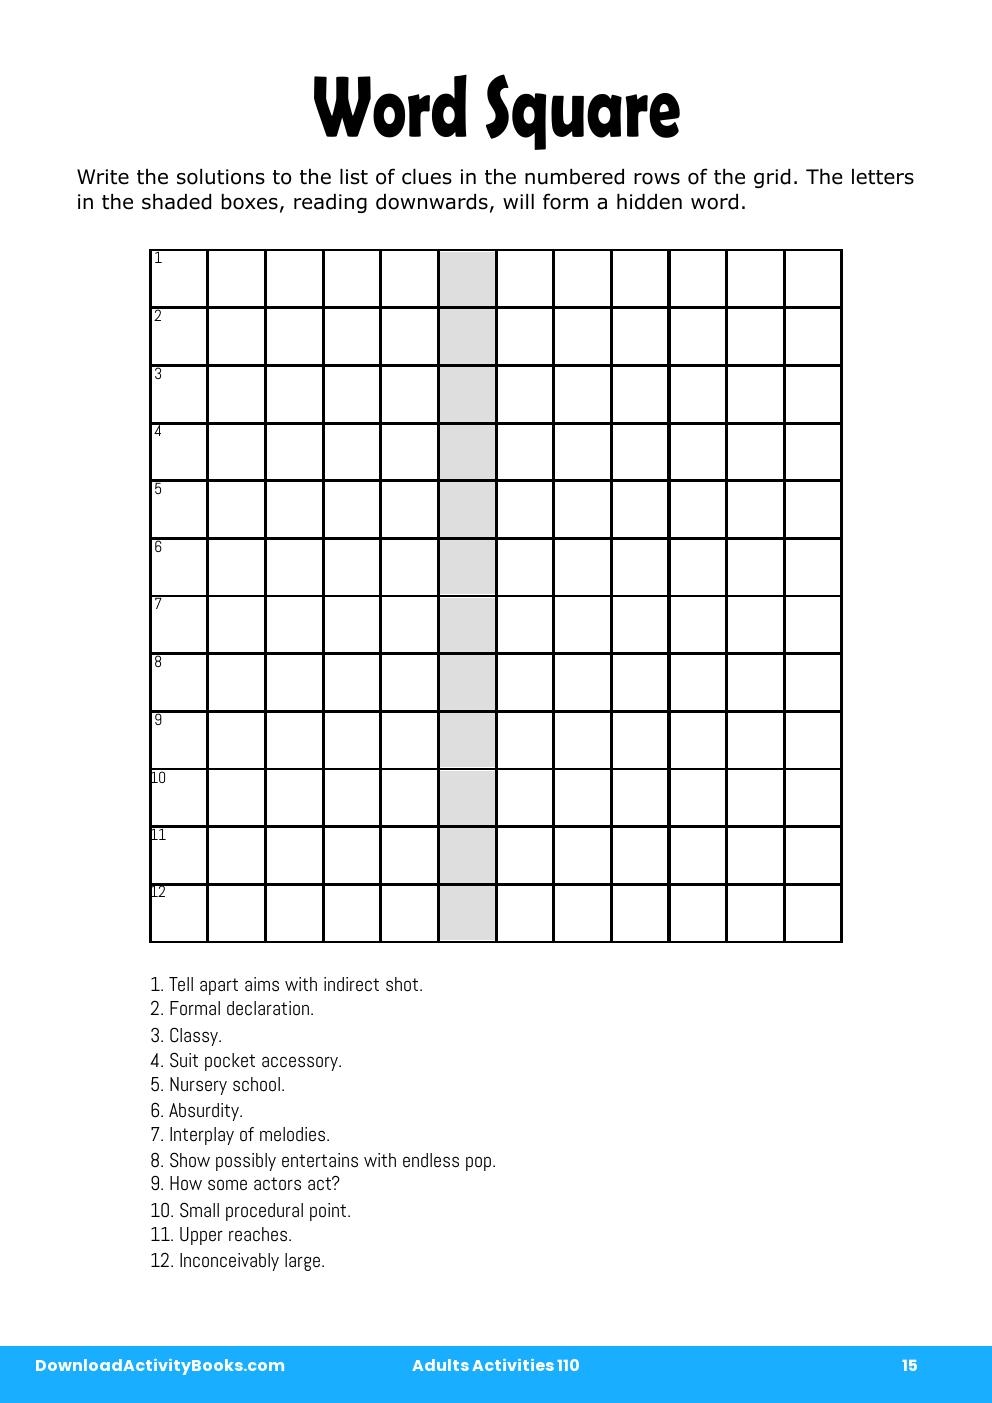 Word Square in Adults Activities 110